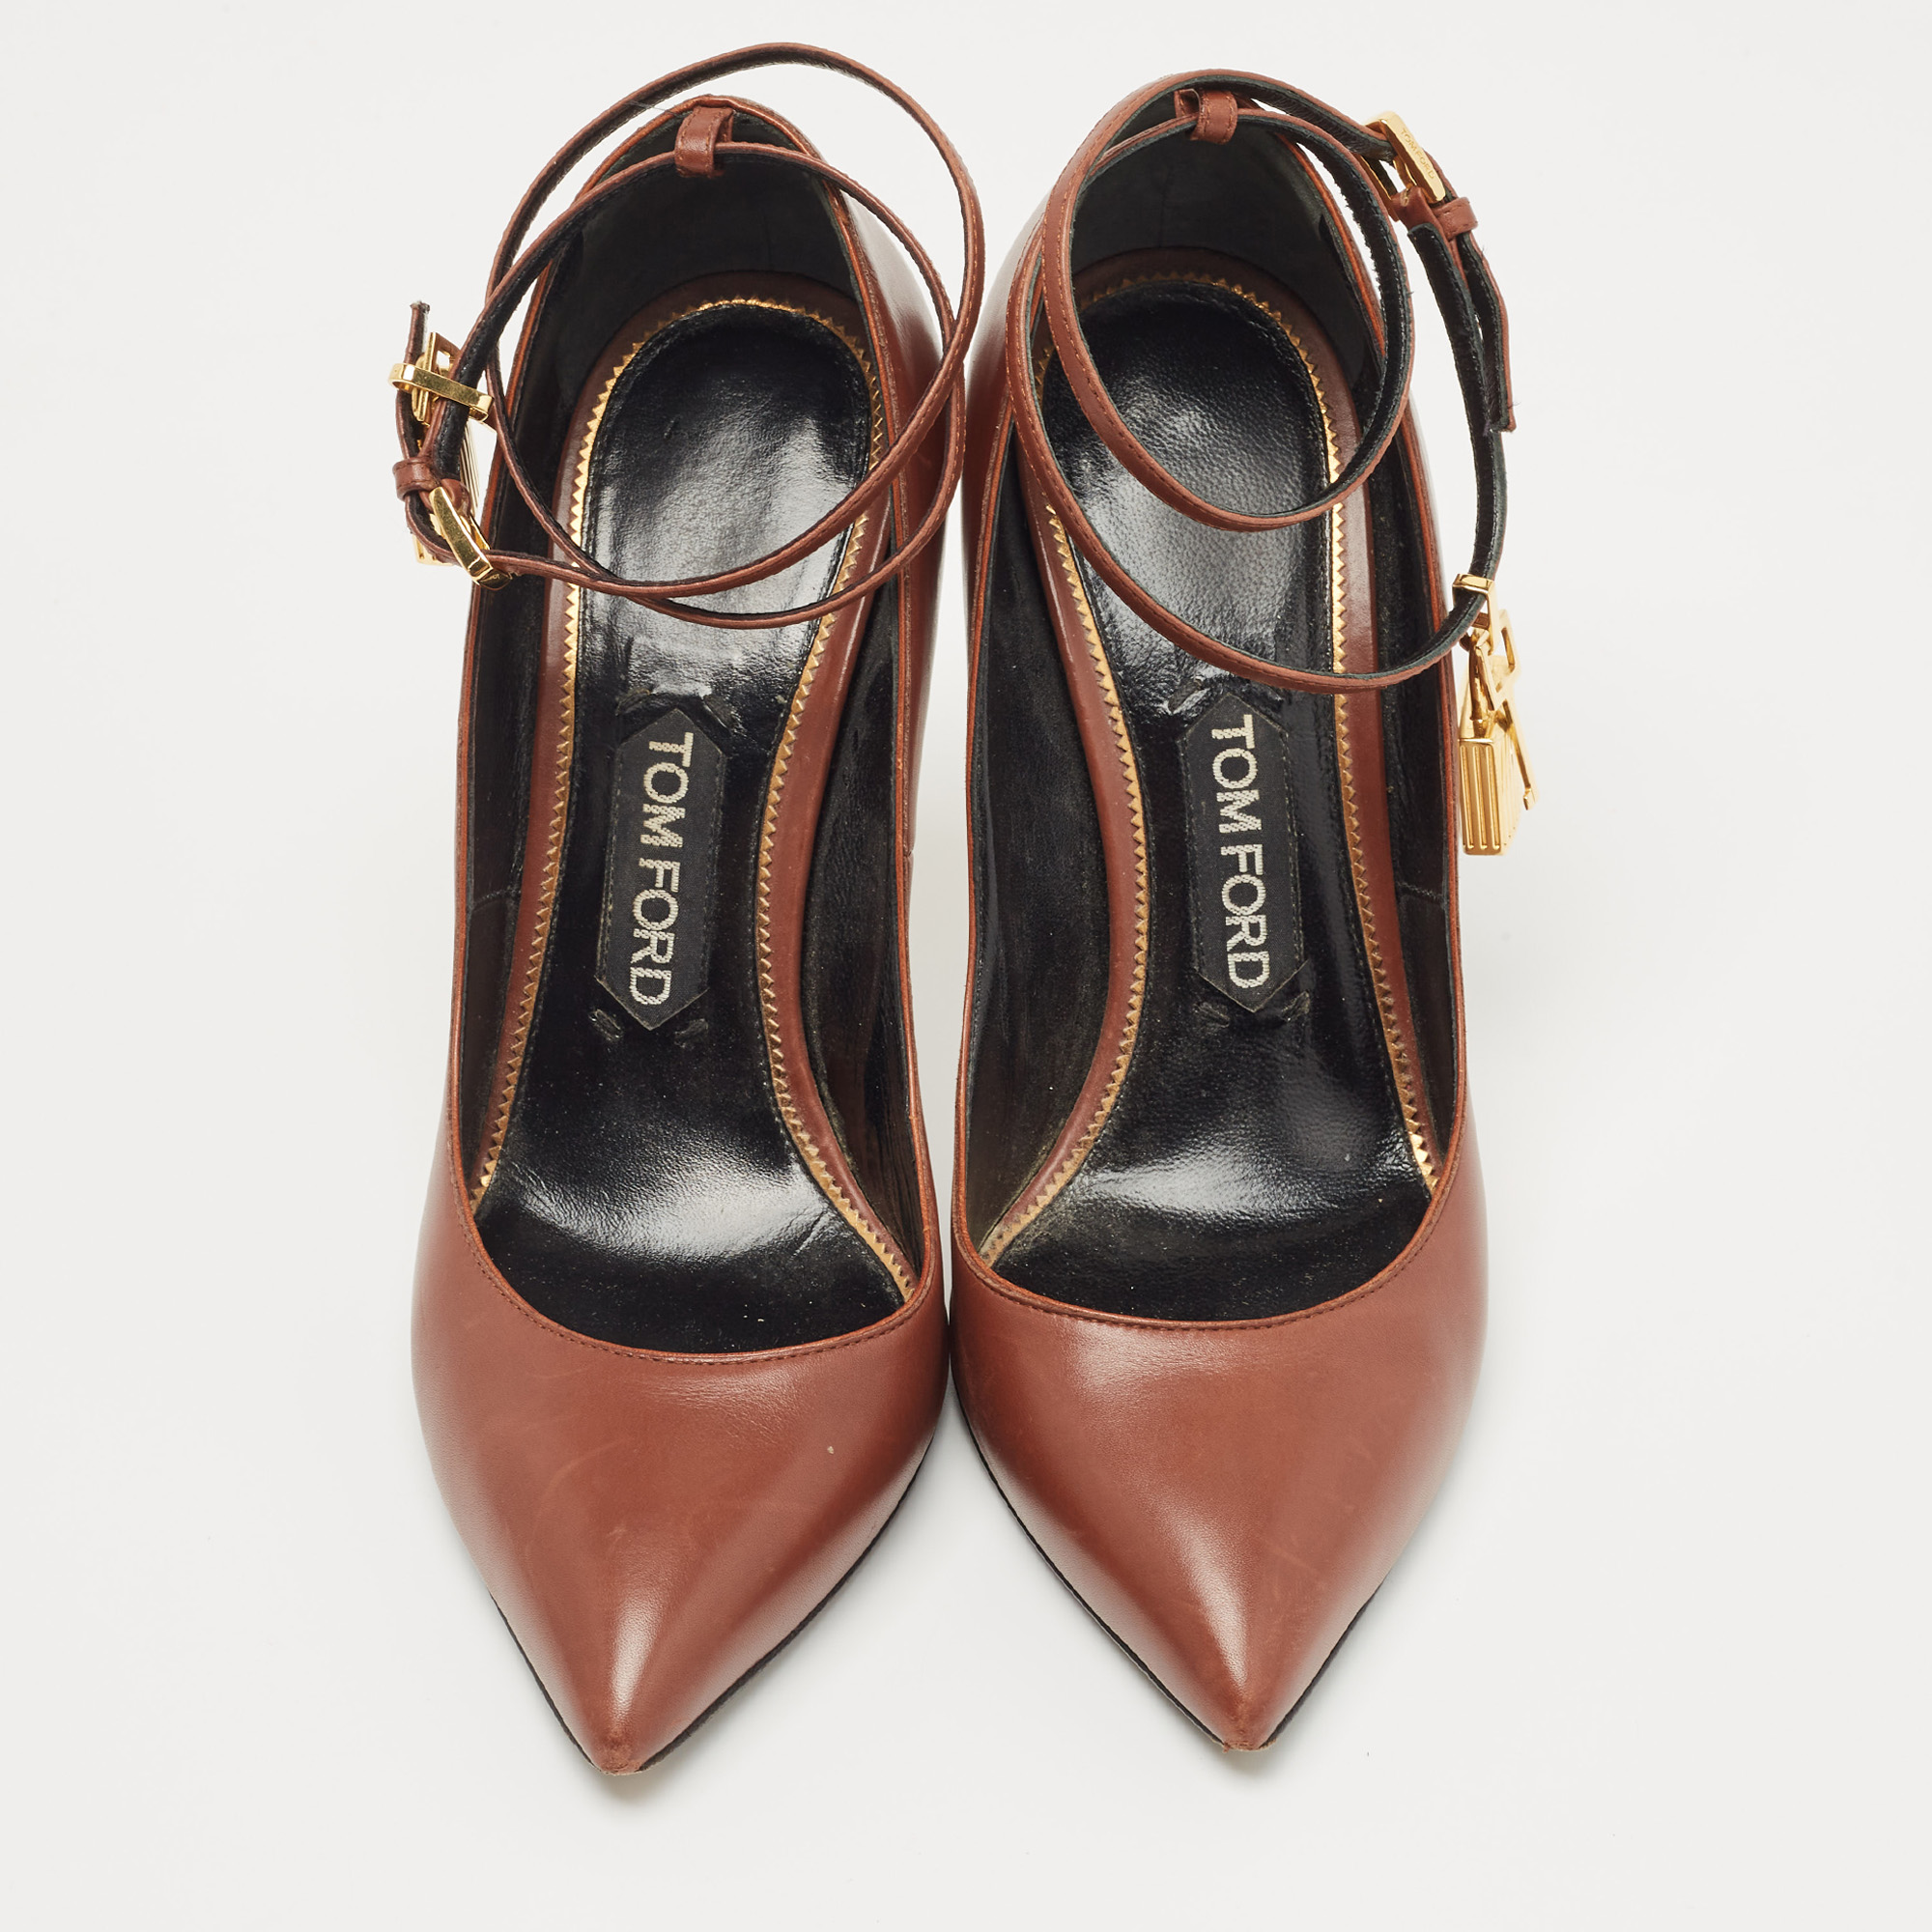 Tom Ford Brown Leather Padlock Pumps Size 38.5